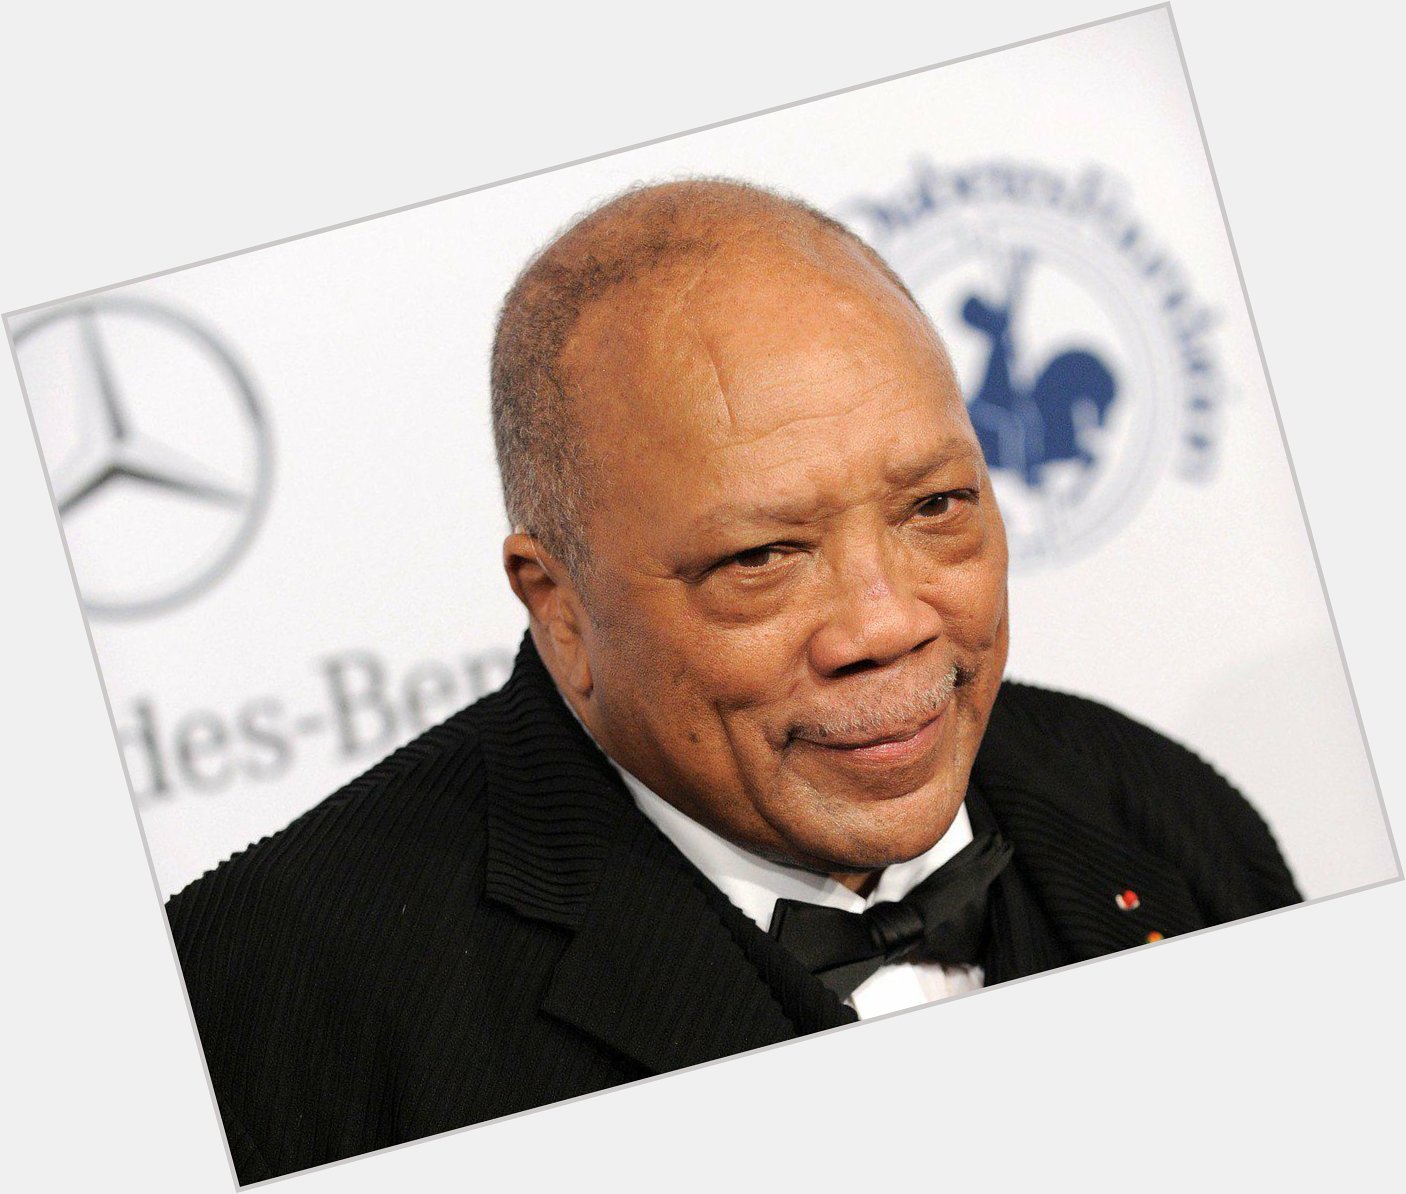 Happy 82nd Birthday to one of the most influential musicians of the 20th century - Quincy Jones! 